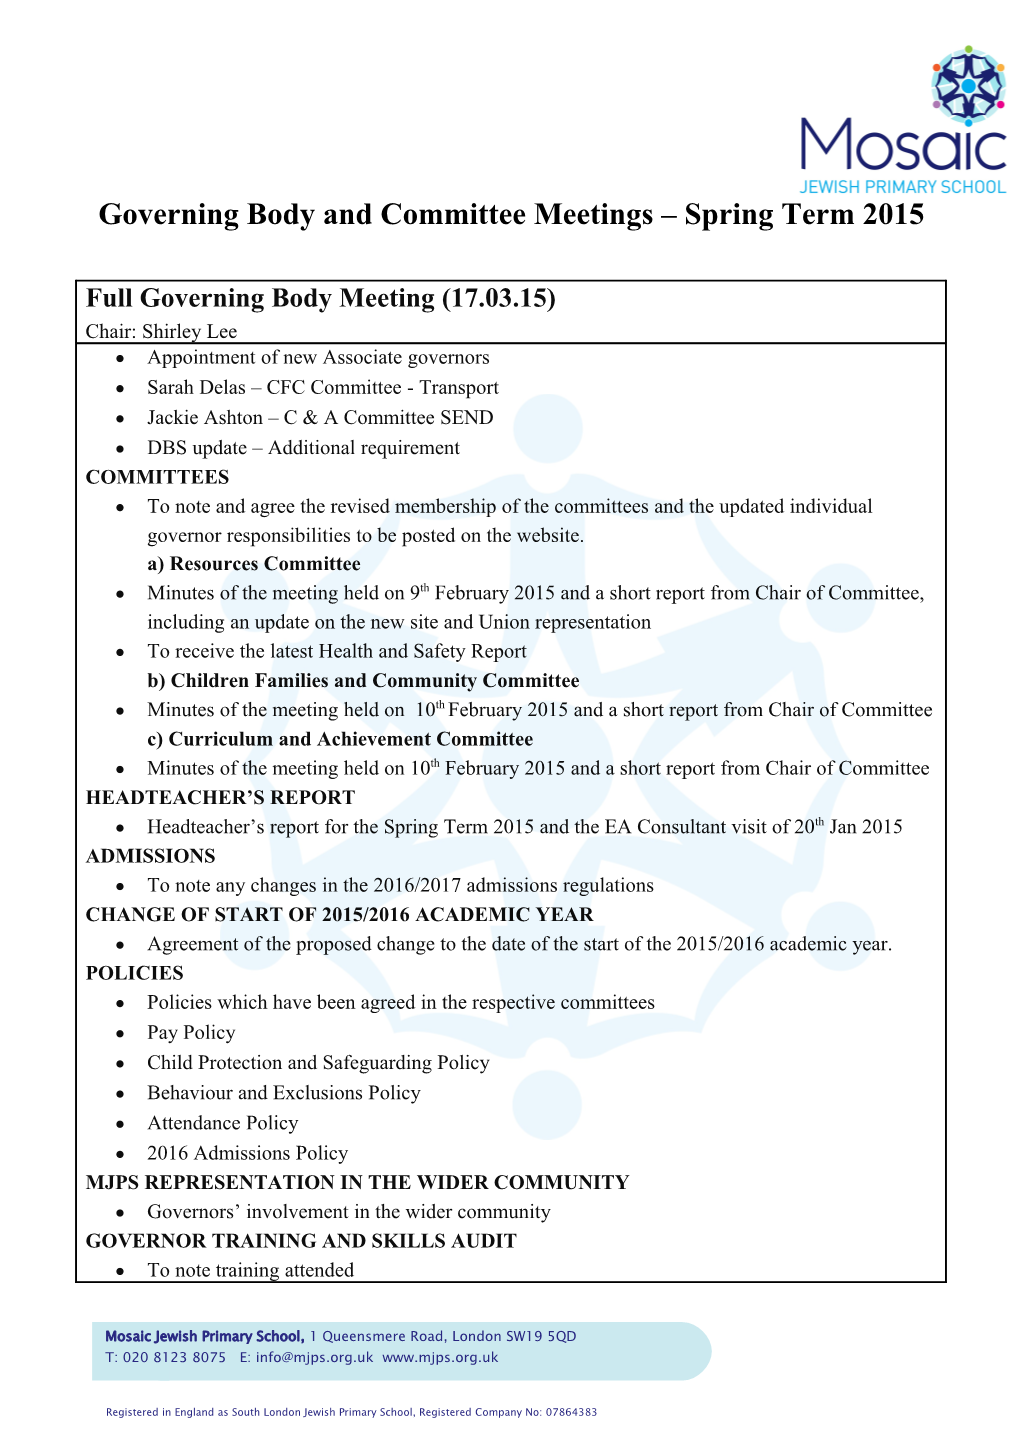 Governing Body and Committee Meetings Spring Term 2015